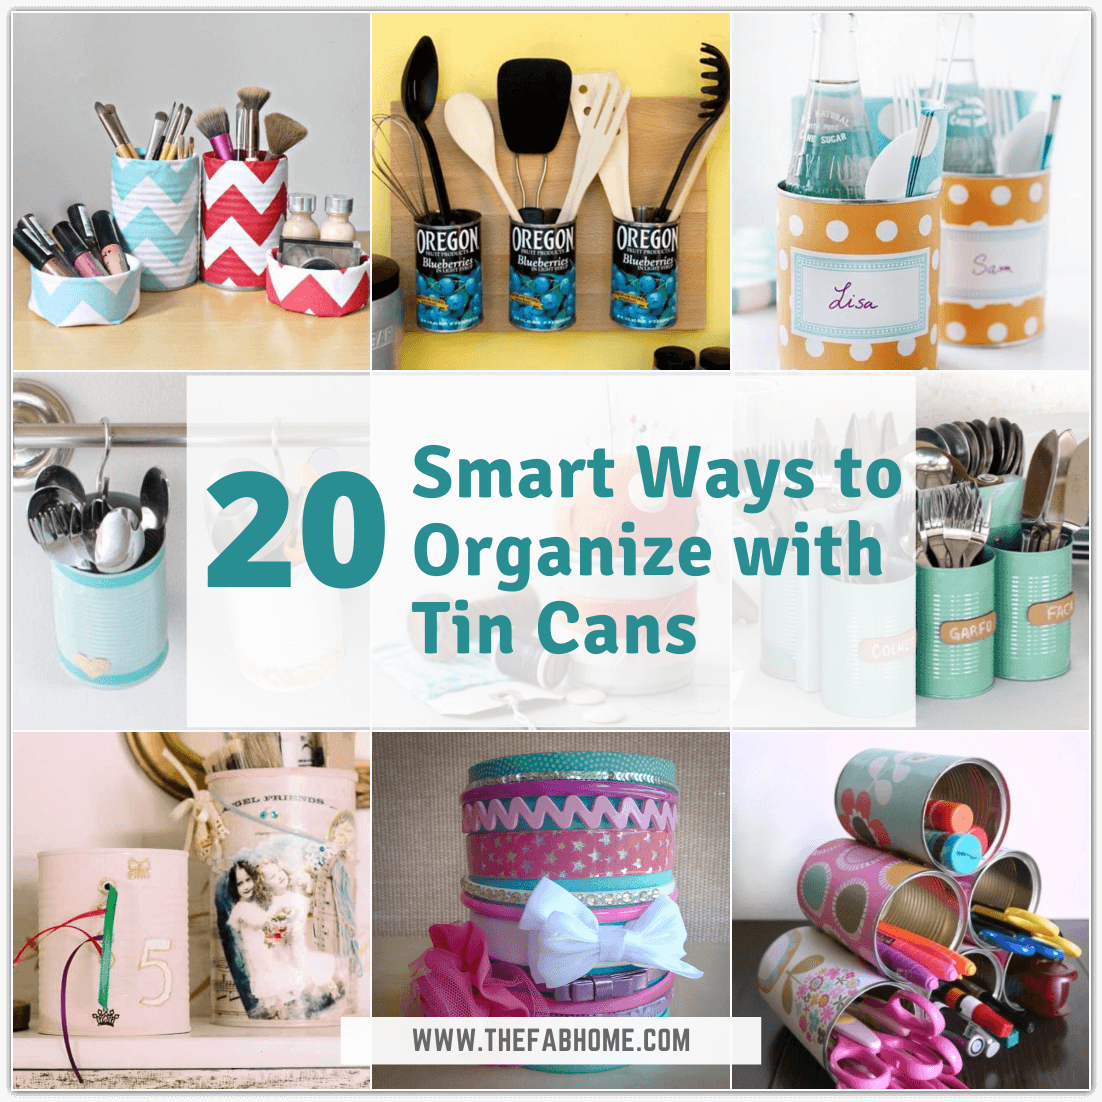 Do you have empty cans lying around? Whatever size of tin cans you have, make use of them with these 20 Super Smart Ways to Organize with Tin Cans! 